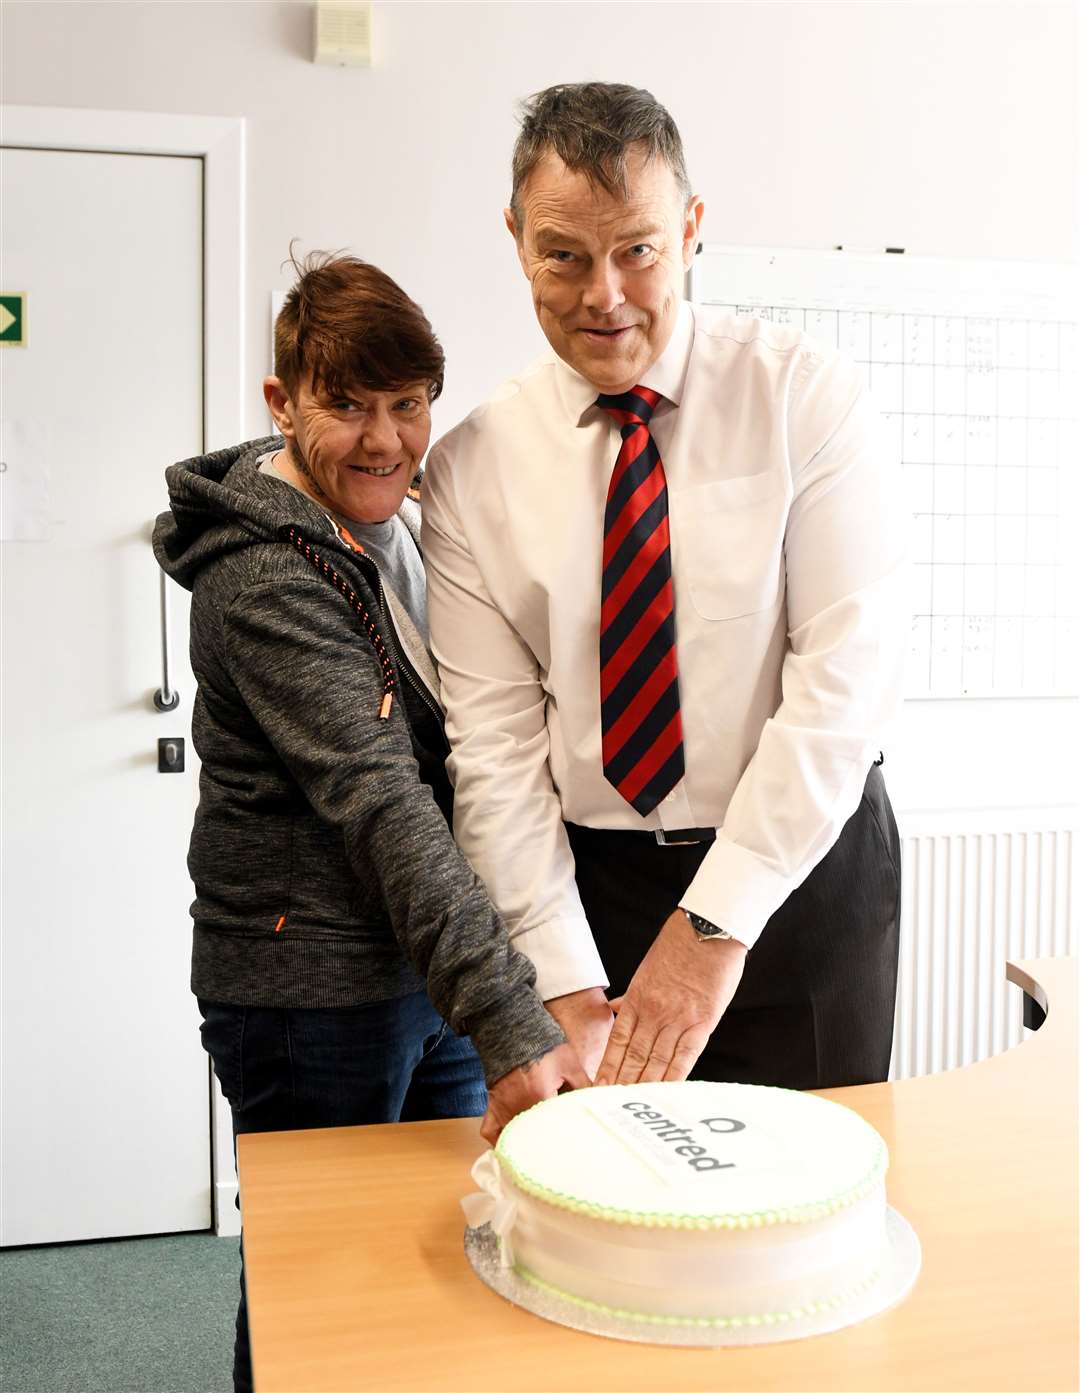 Lainey Anderson and Centred chief executive David Brookfield cut the cake.